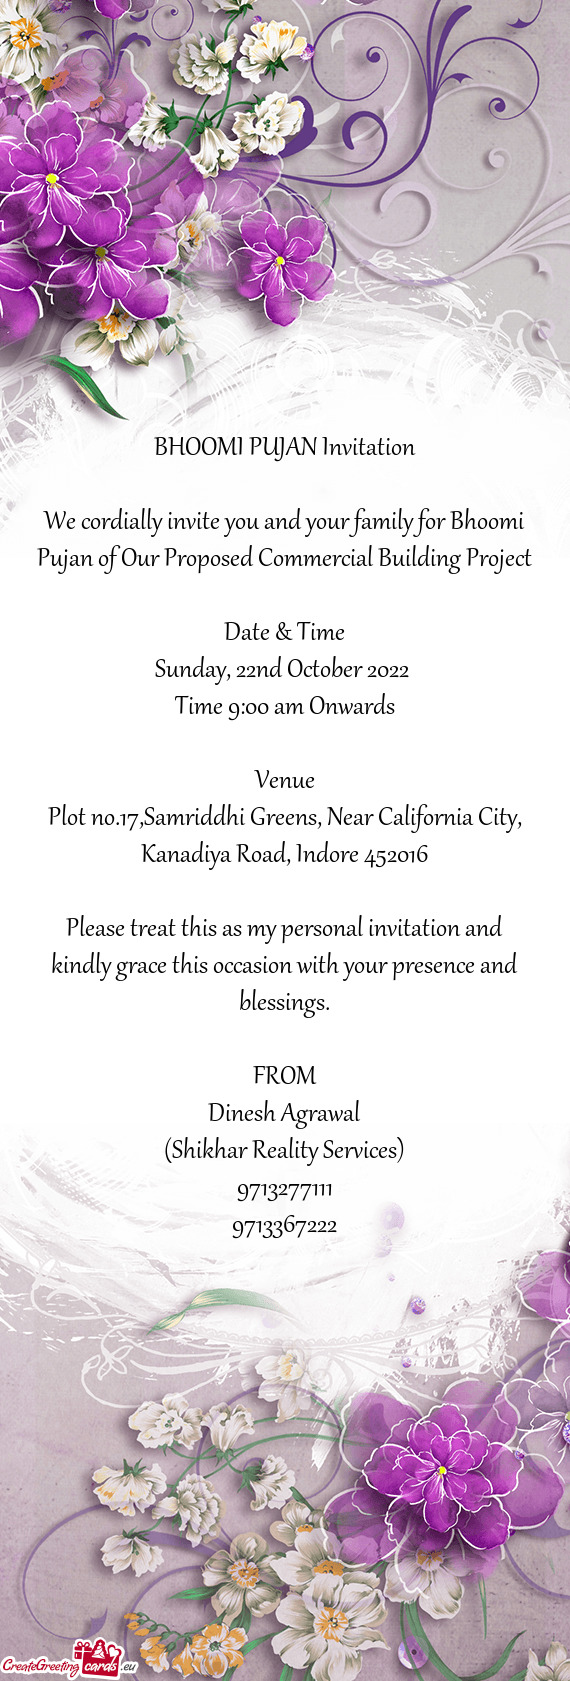 We cordially invite you and your family for Bhoomi Pujan of Our Proposed Commercial Building Project